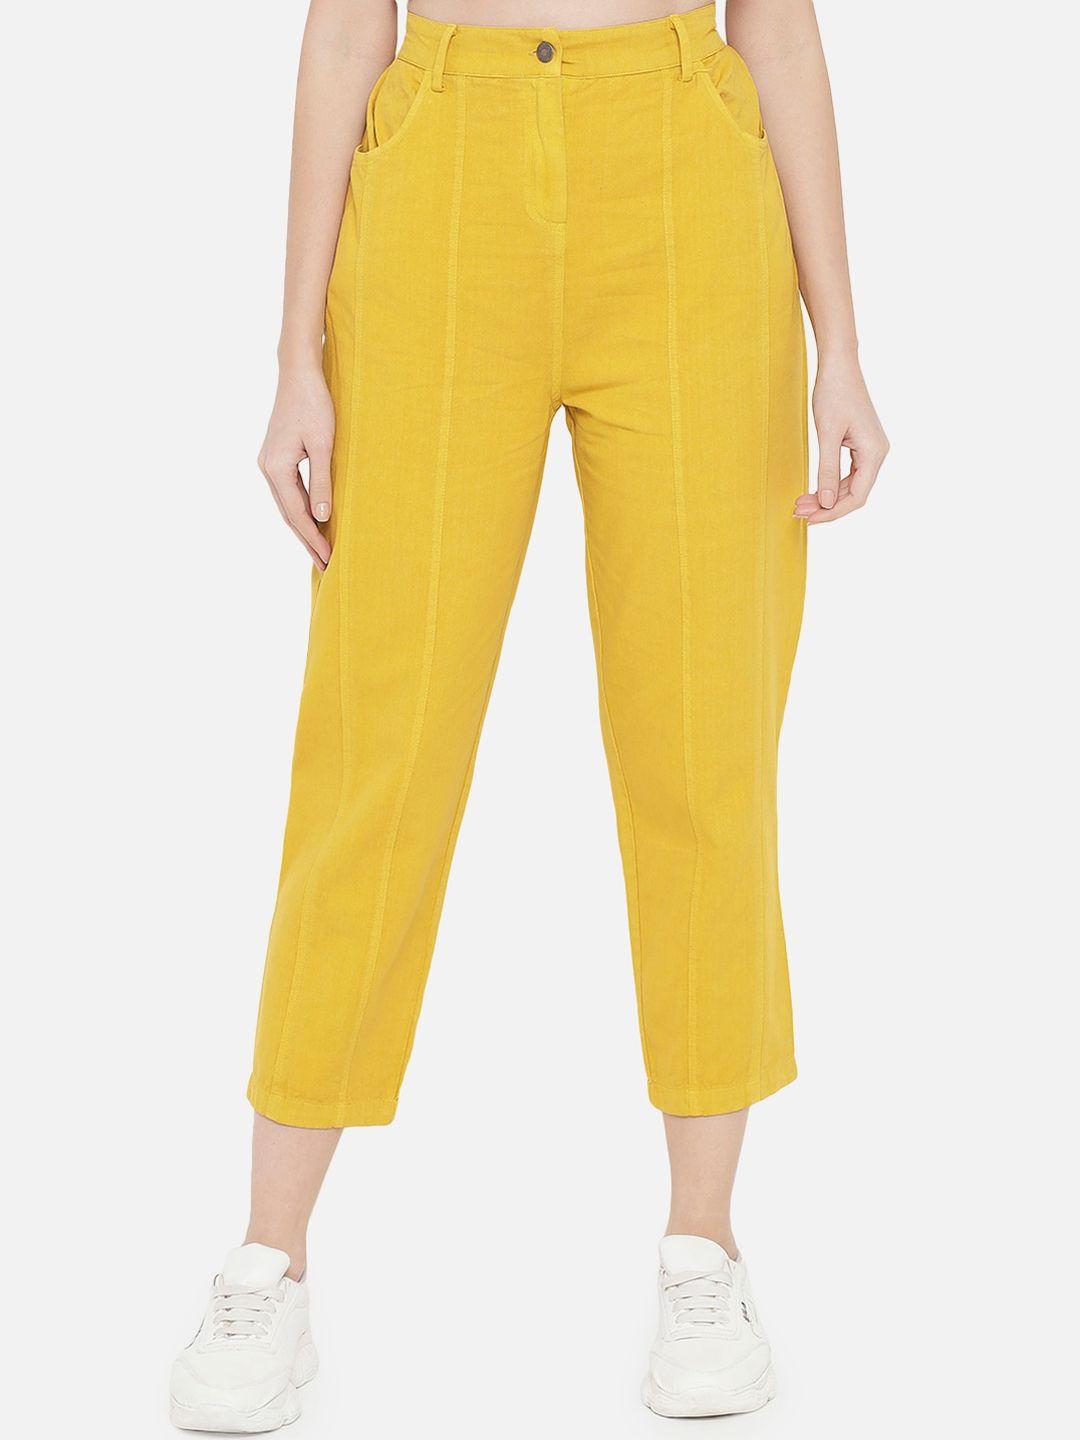 orchid hues women yellow high-rise jeans